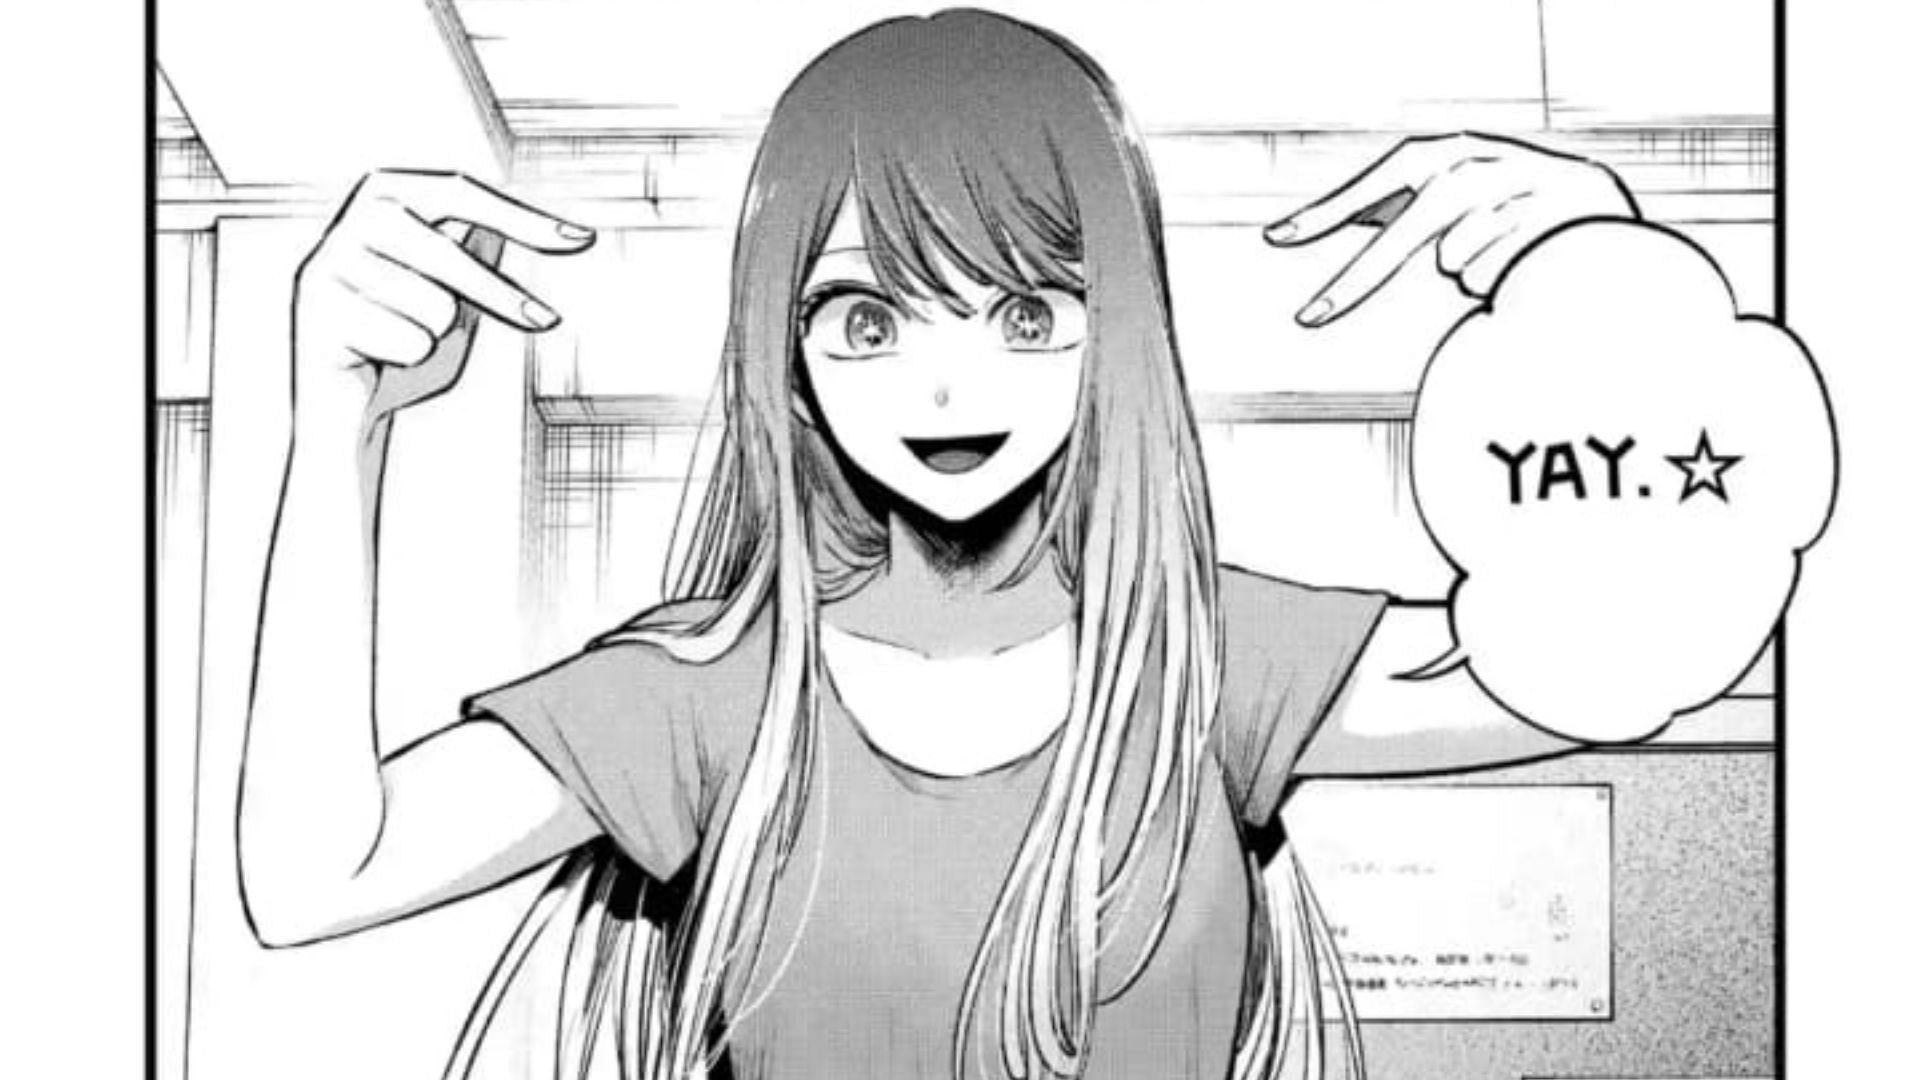 Oshi no Ko Info & News - Unofficial on X: Oshi no Ko chapter 116,  Responsibility is now available in English on Mangaplus!   Kana episode 3 also aired today!   /